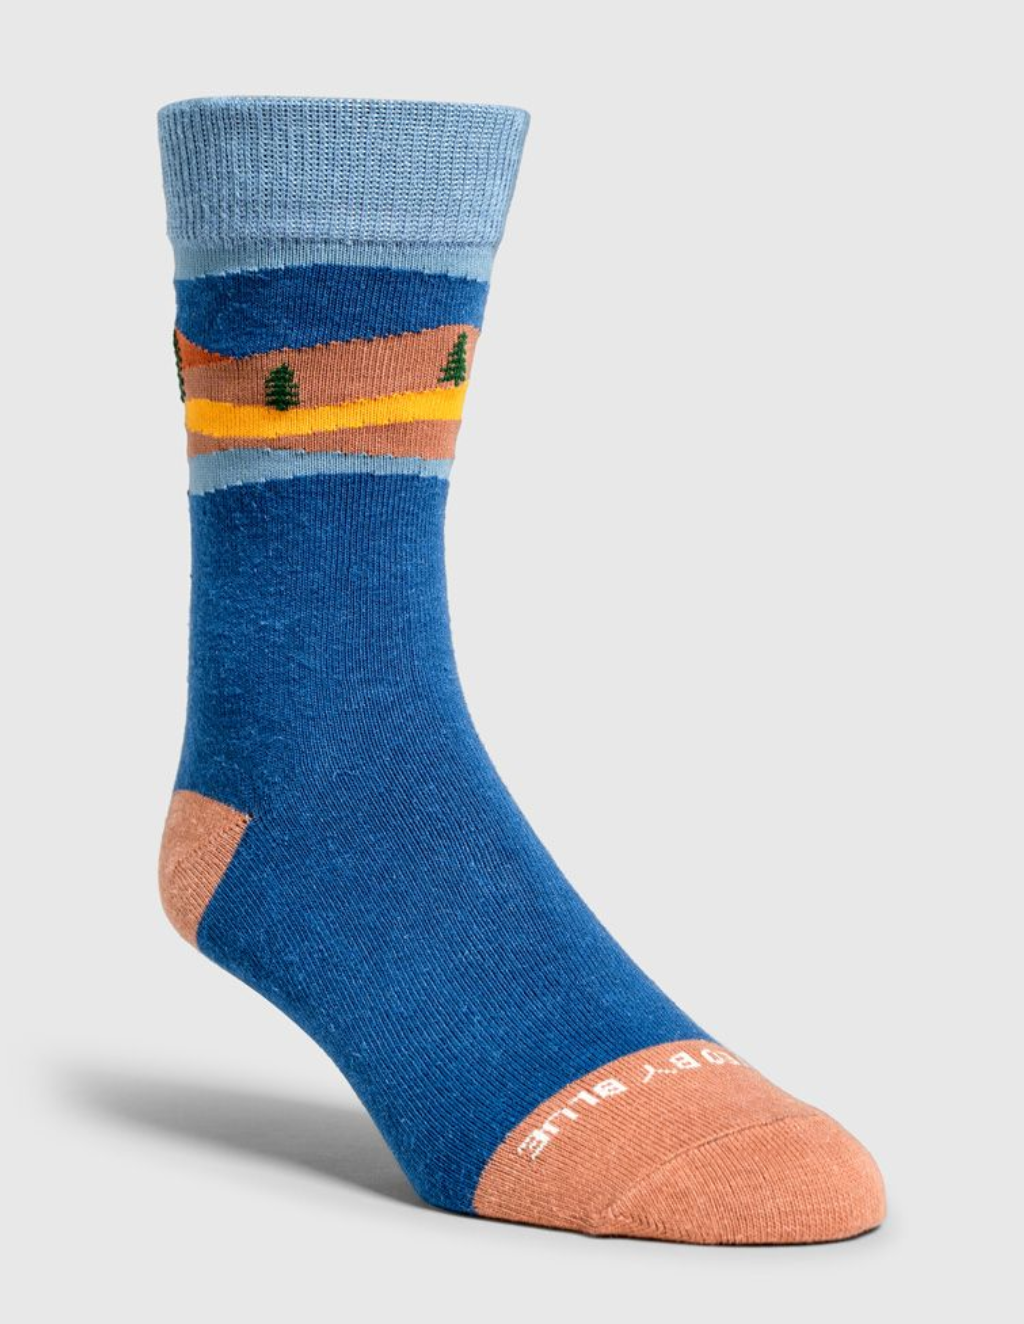 United By Blue Softhemp Sock 2 Pack (Navy) SMALL